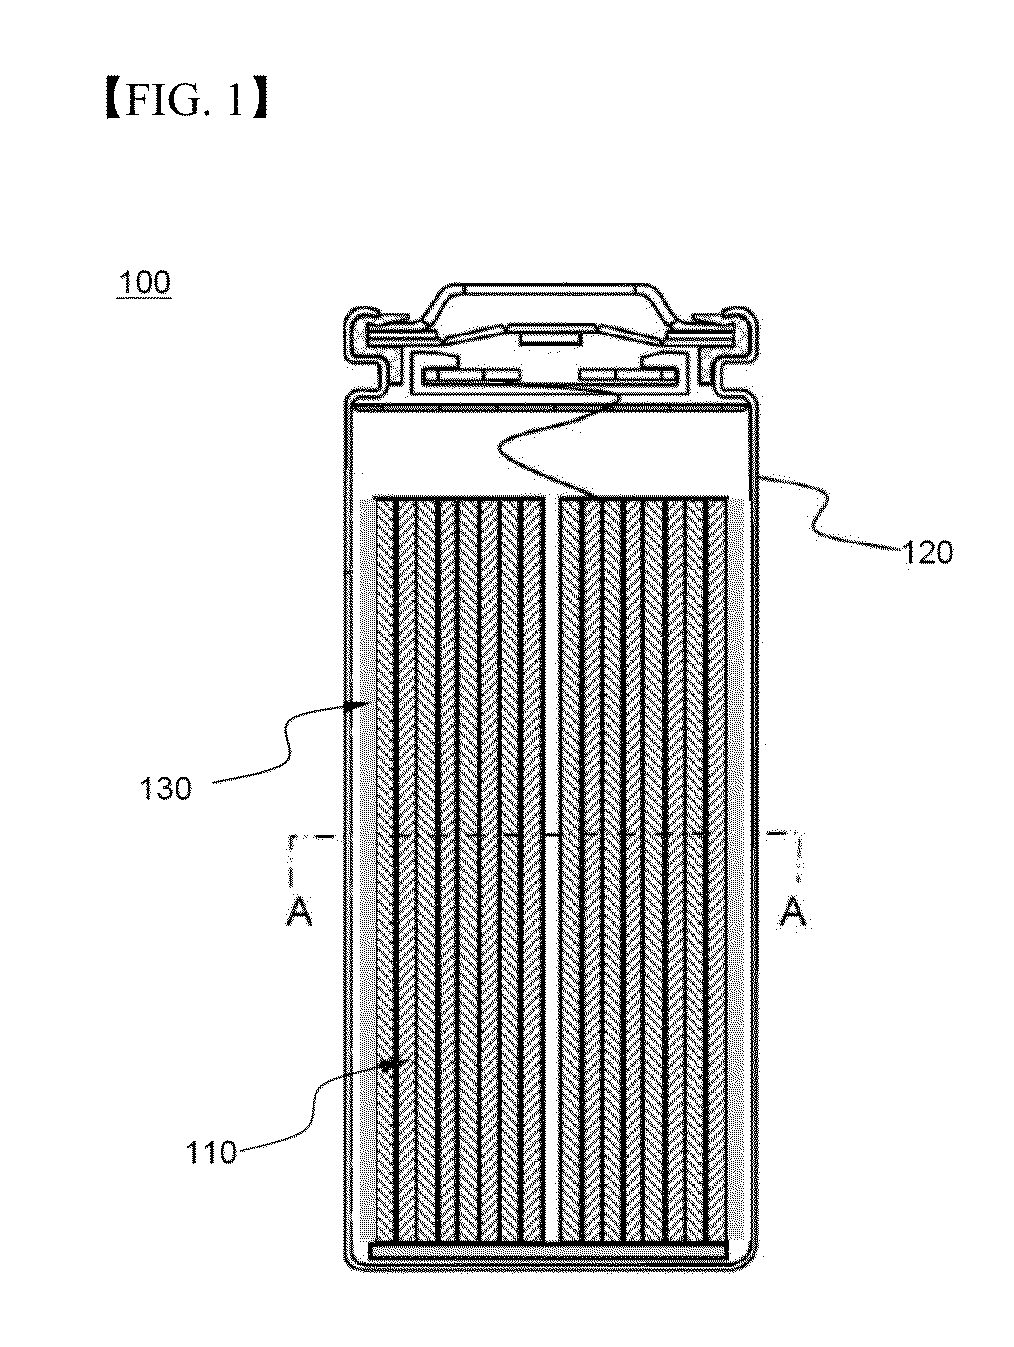 Cylindrical secondary battery of improved safety